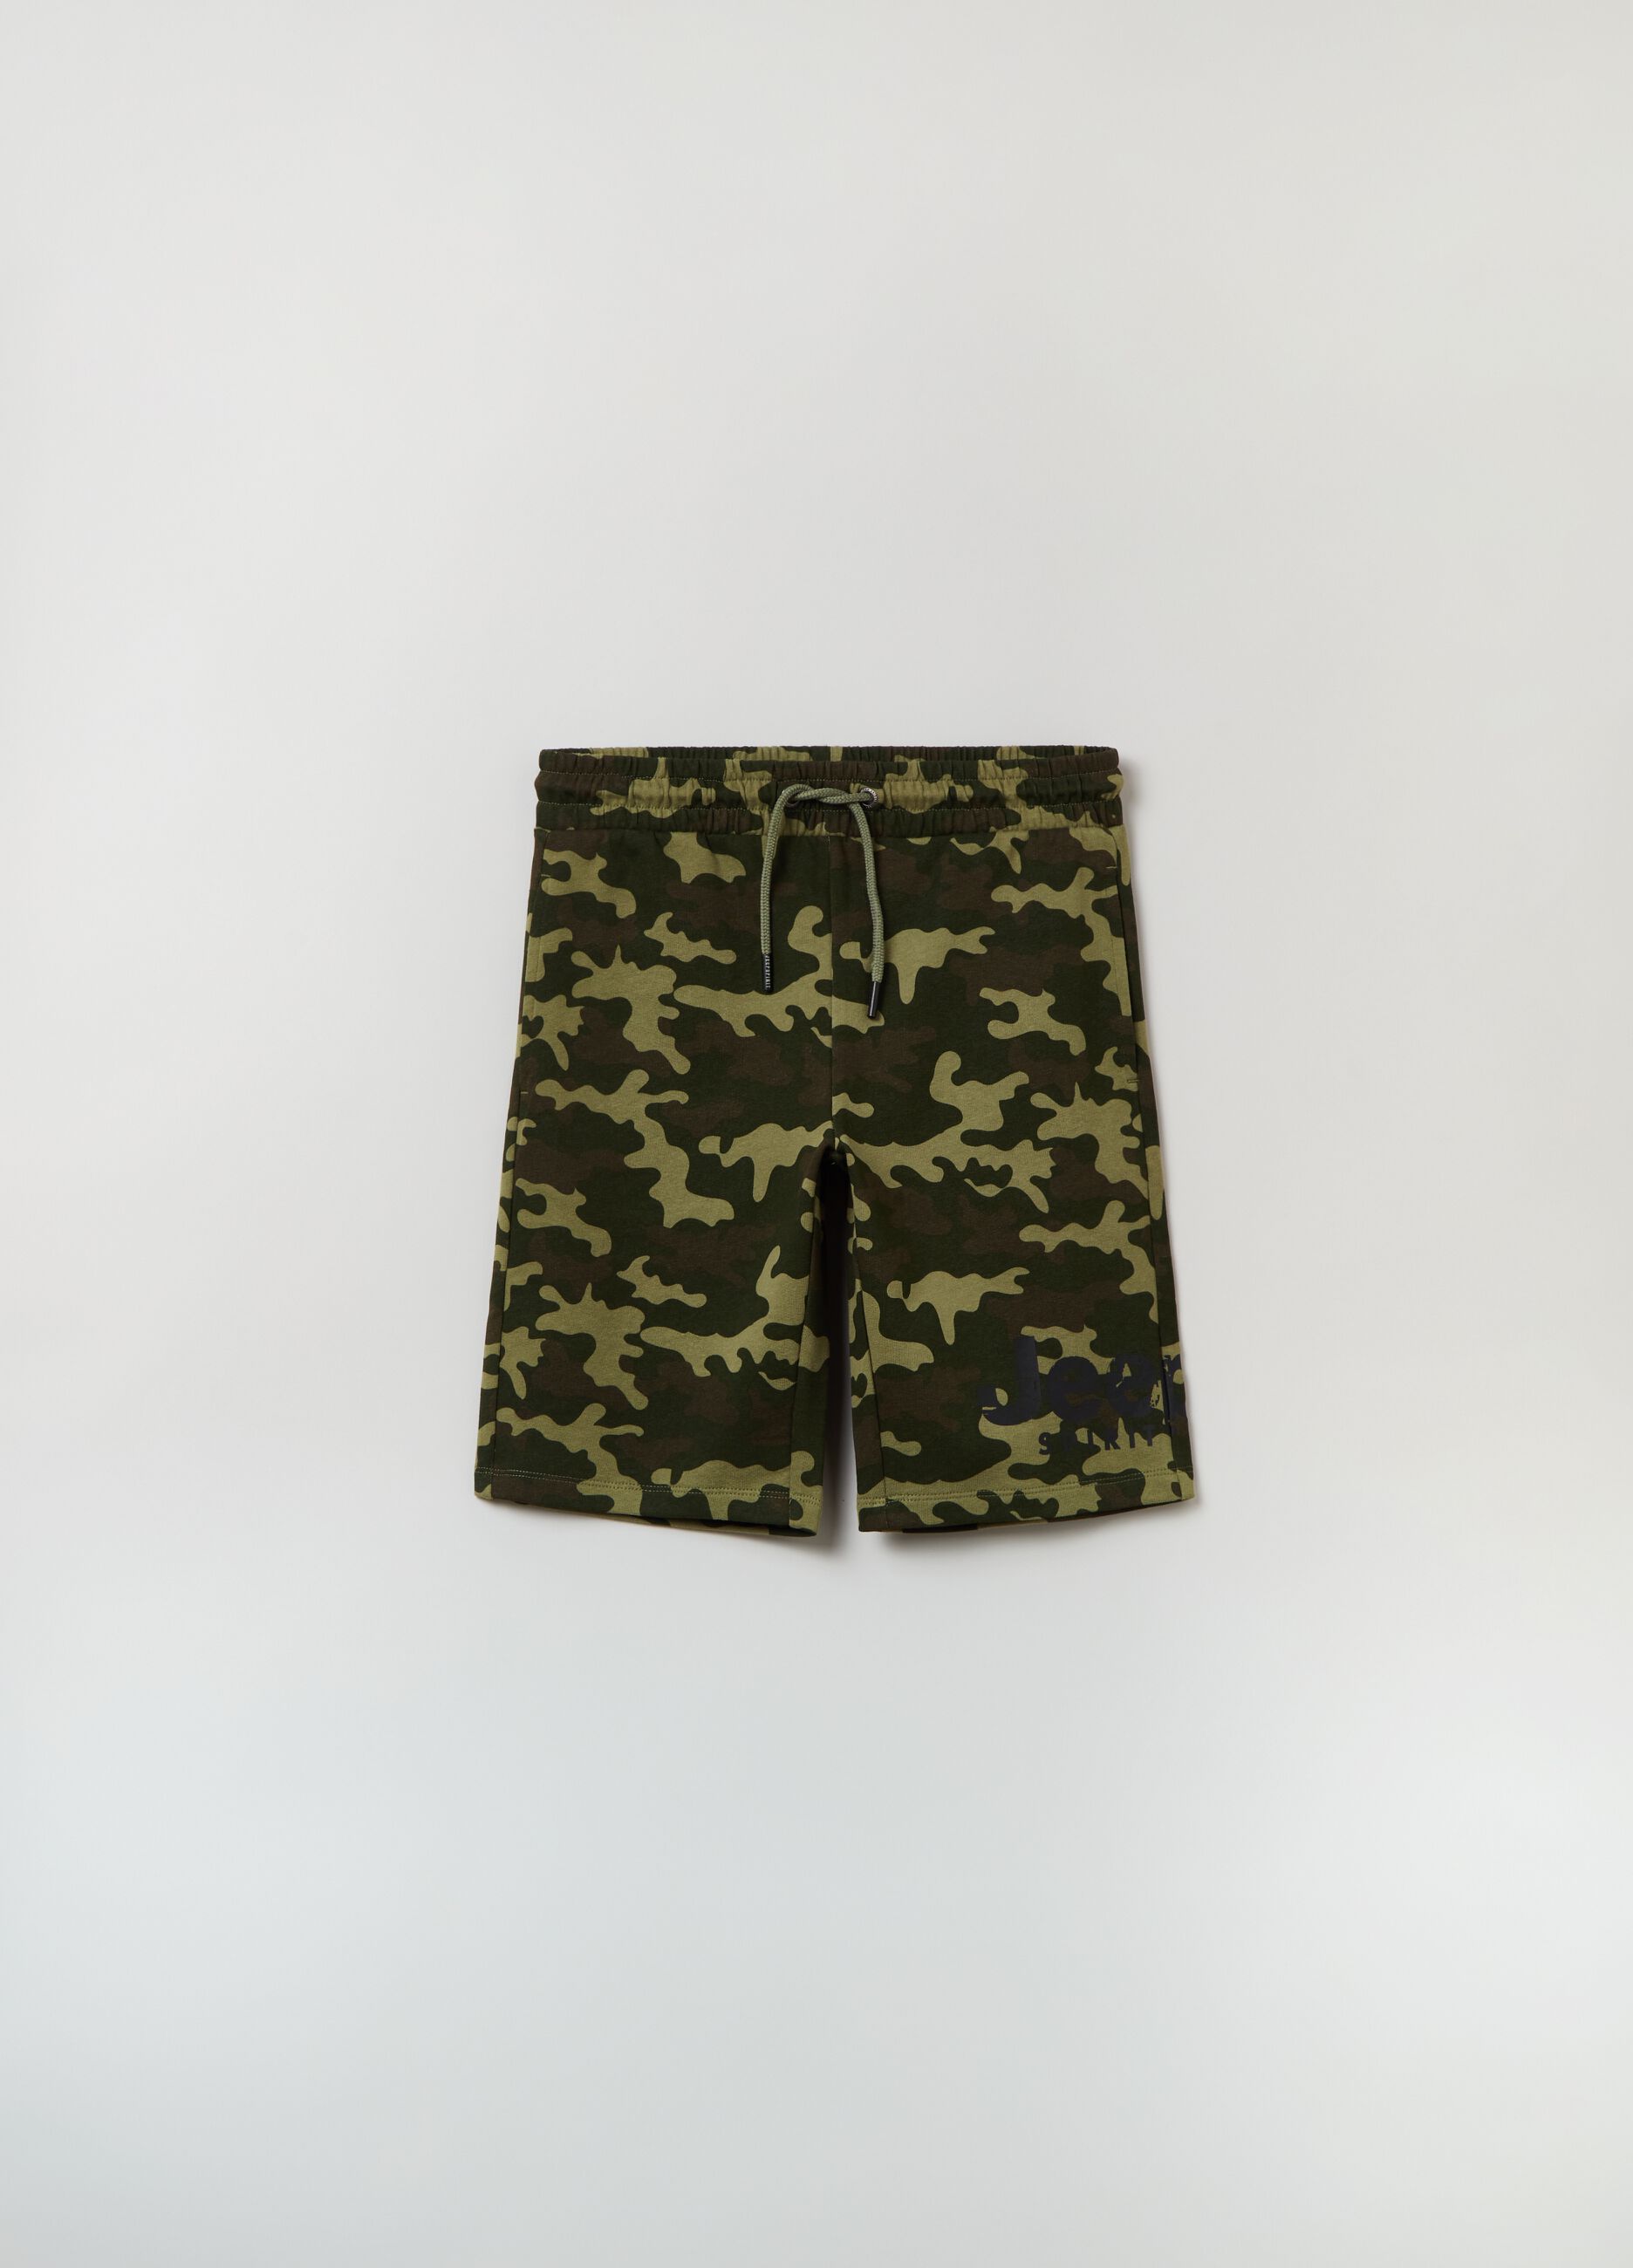 Camouflage Bermuda shorts with Jeep print